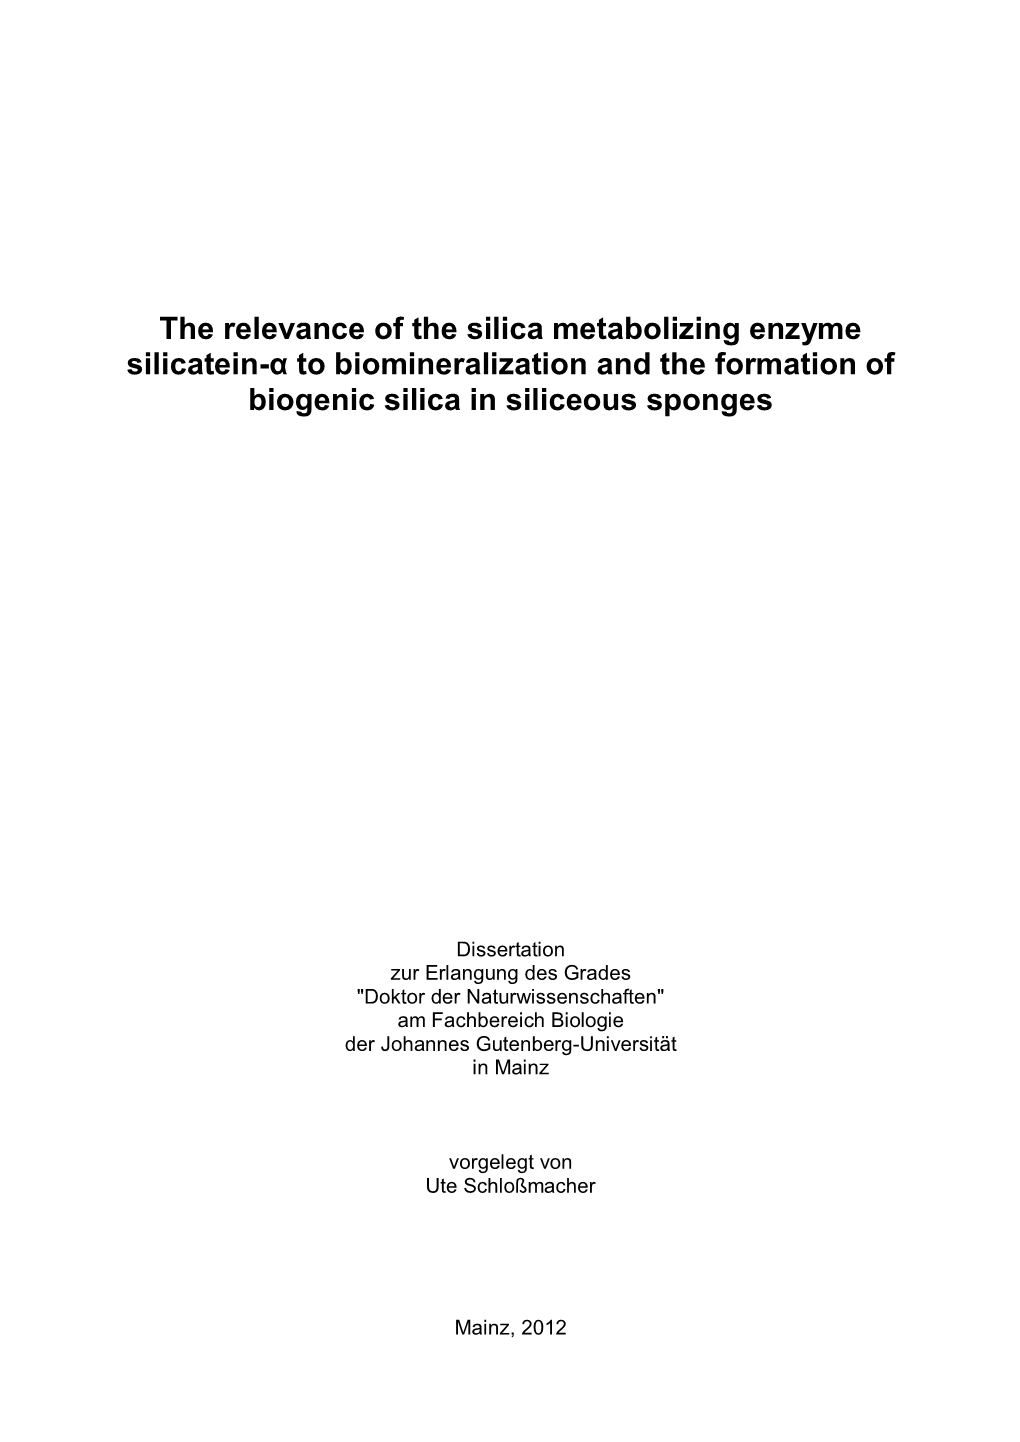 The Relevance of the Silica Metabolizing Enzyme Silicatein-Α to Biomineralization and the Formation of Biogenic Silica in Siliceous Sponges